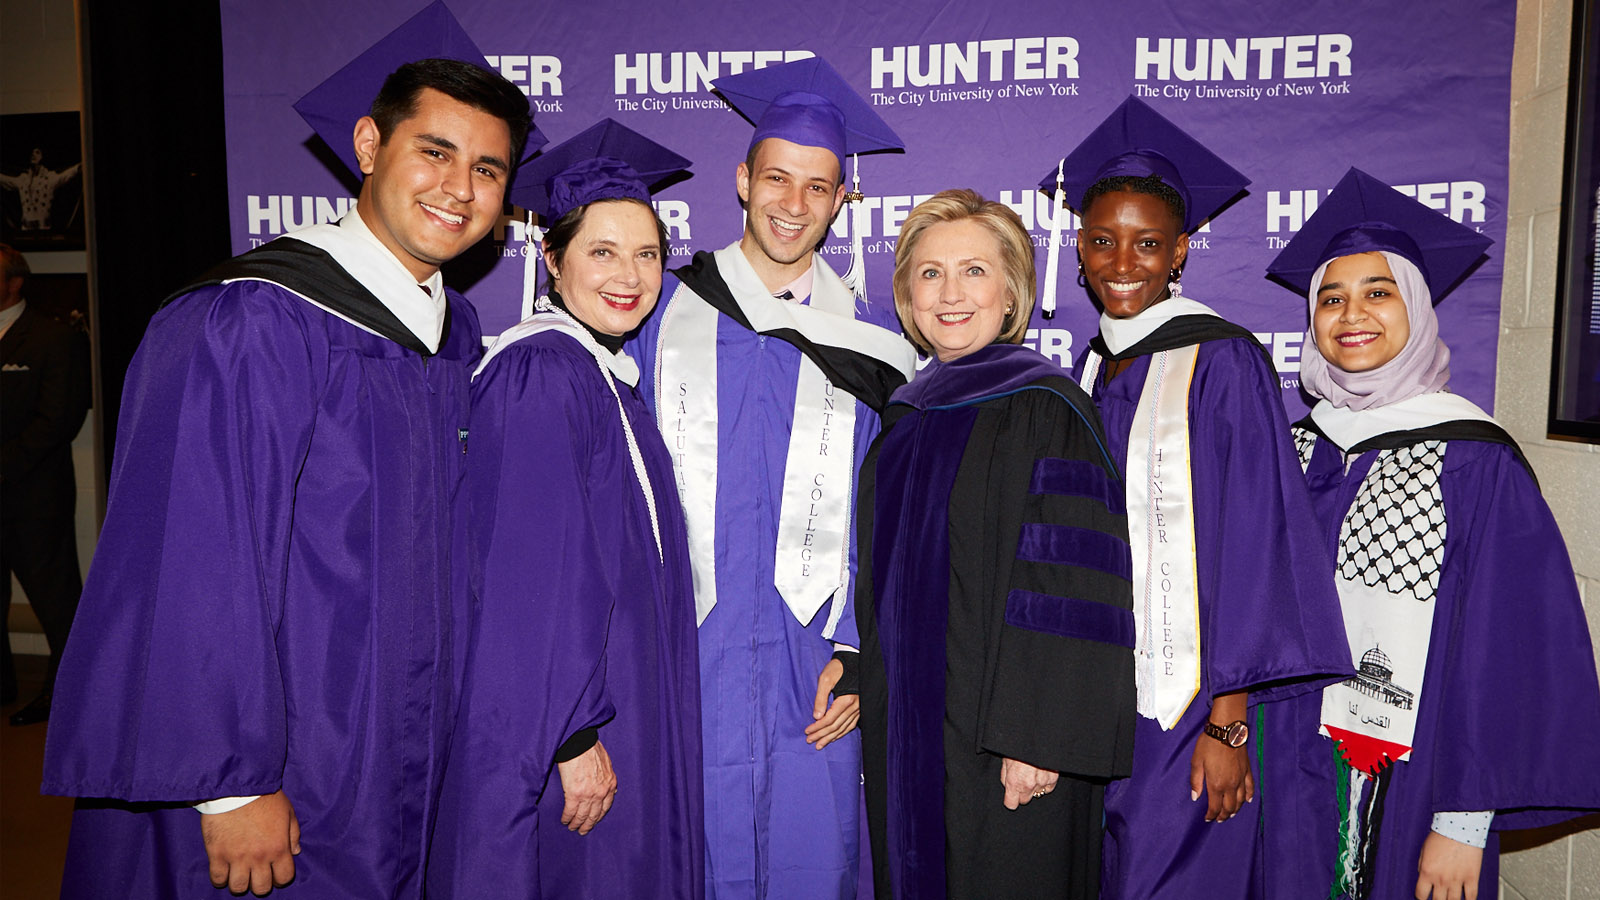 2019 Commencement at Madison Square Garden Hunter College